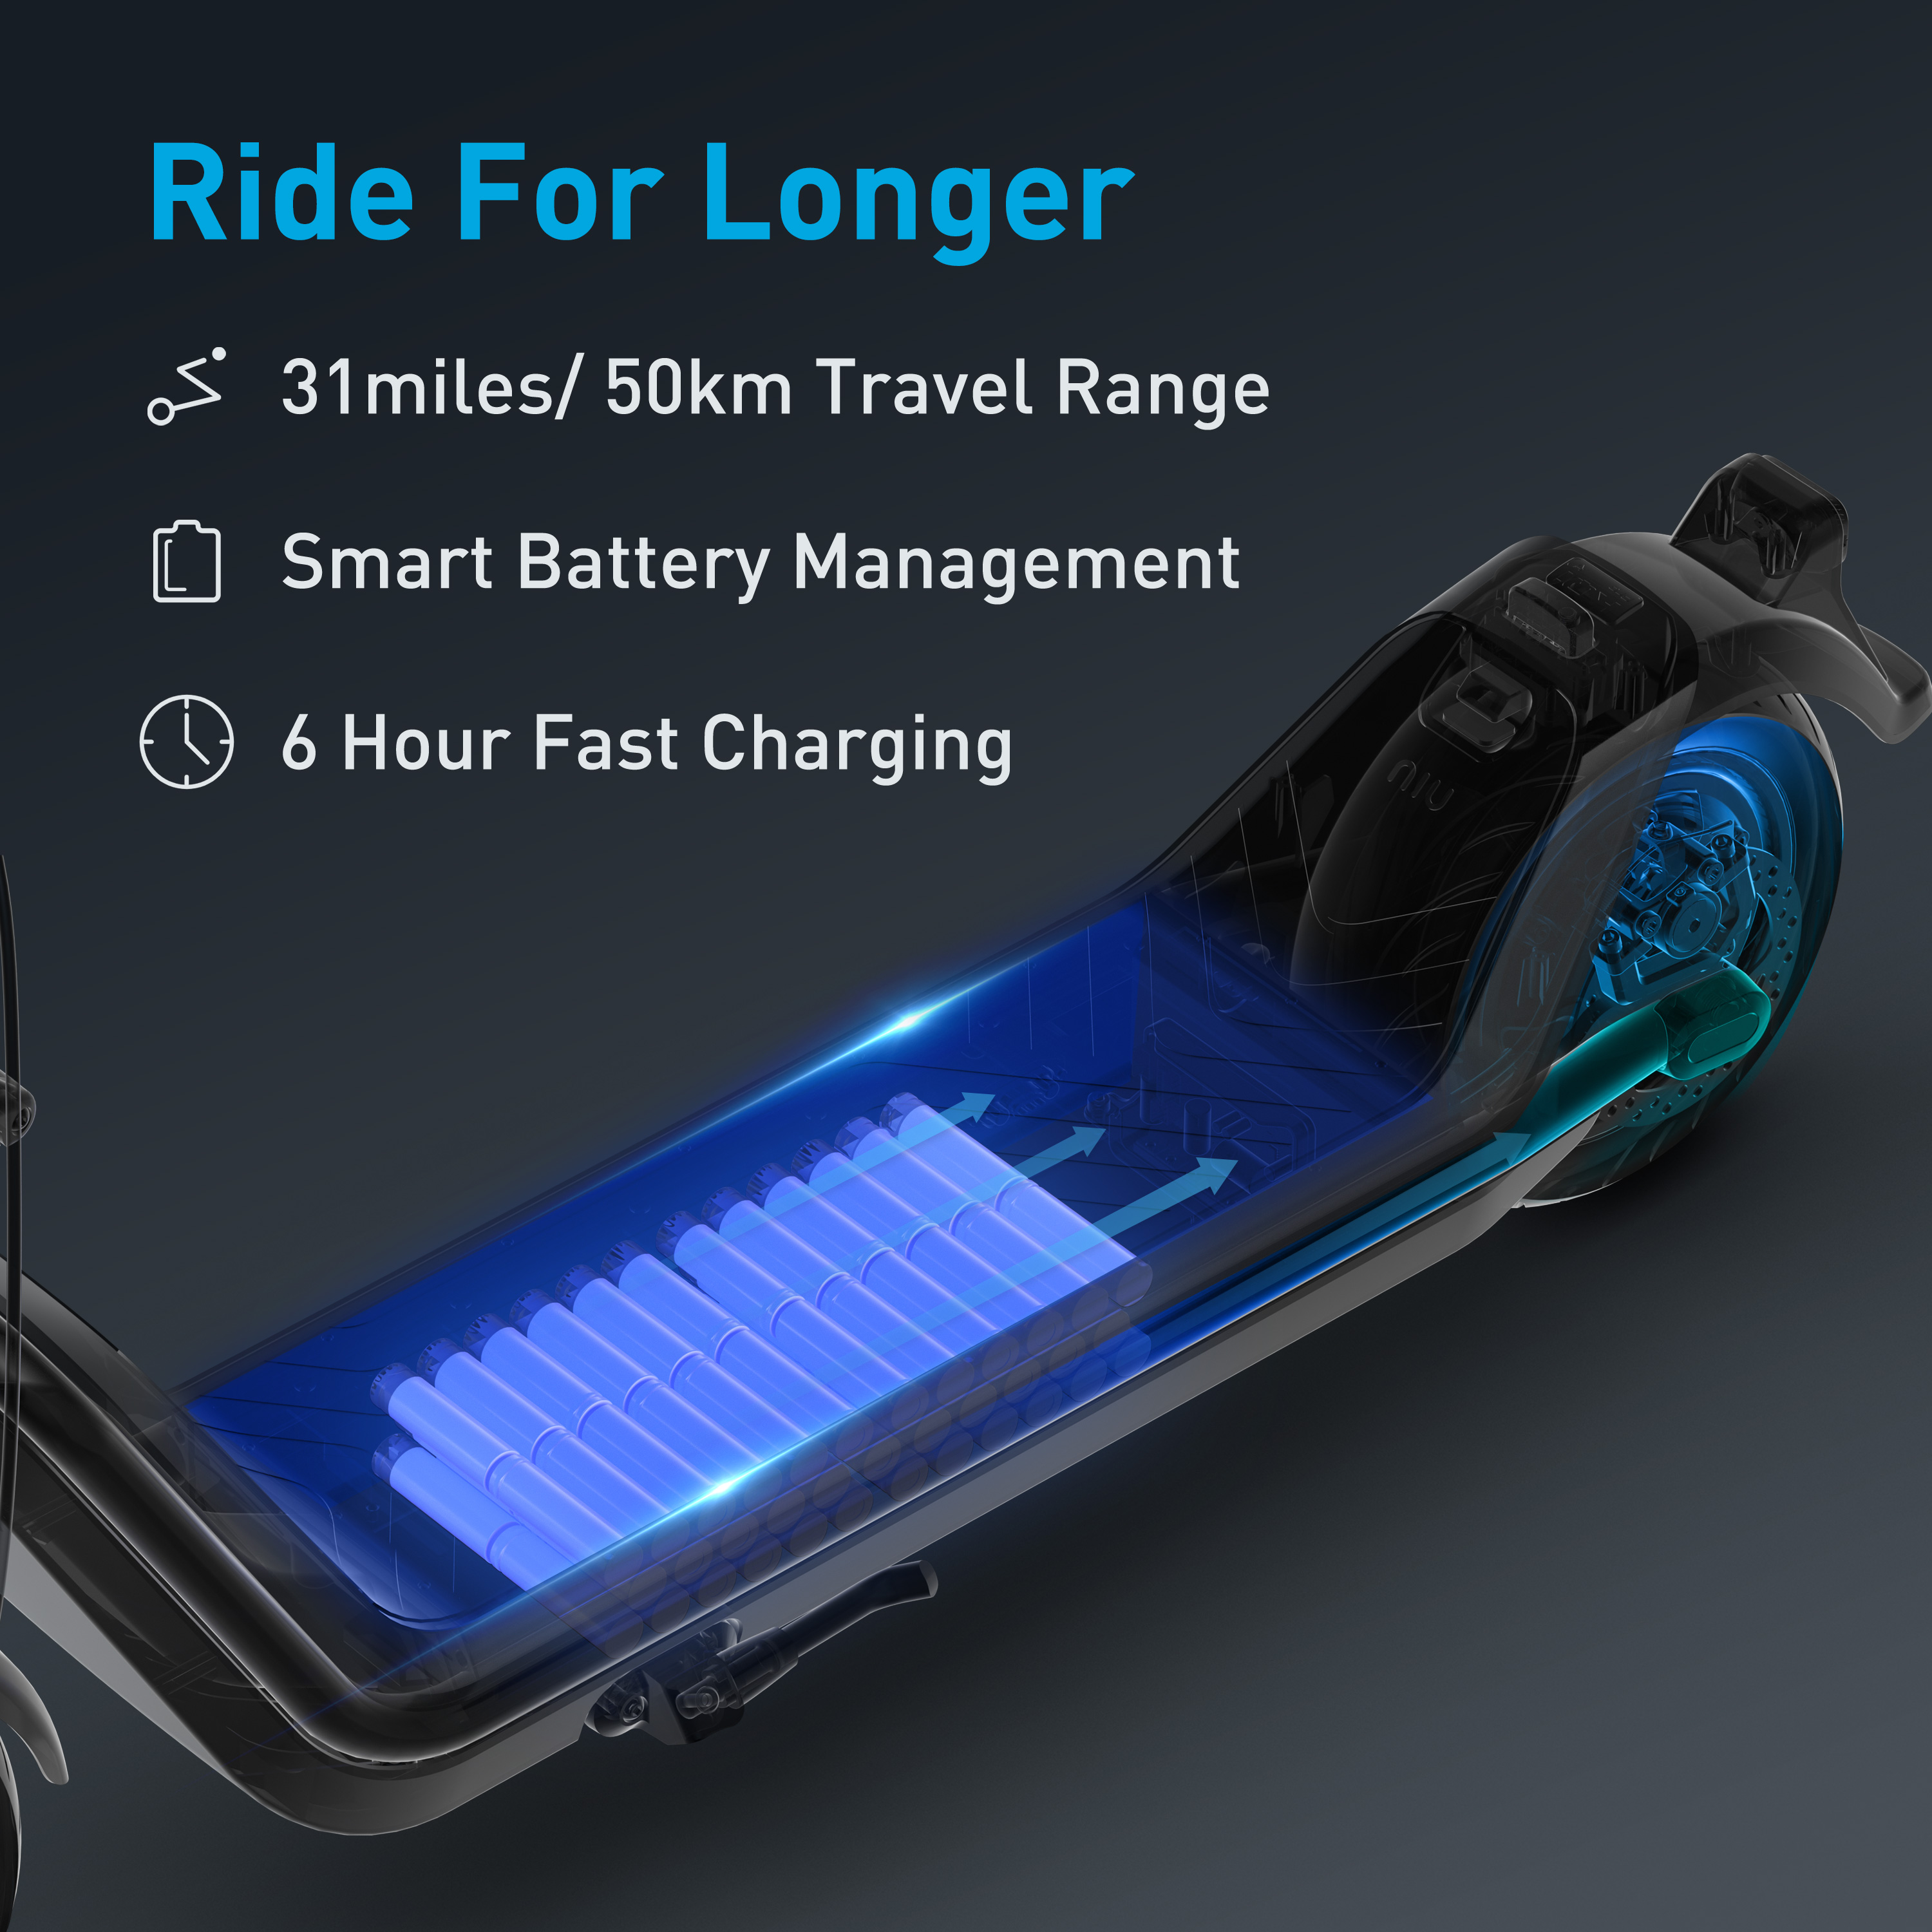 NIU KQi3 Pro Electric Scooter Foldable 31 Miles Range Top Speed 20 mph Fast Charging Battery Foldable Commuting - image 5 of 12